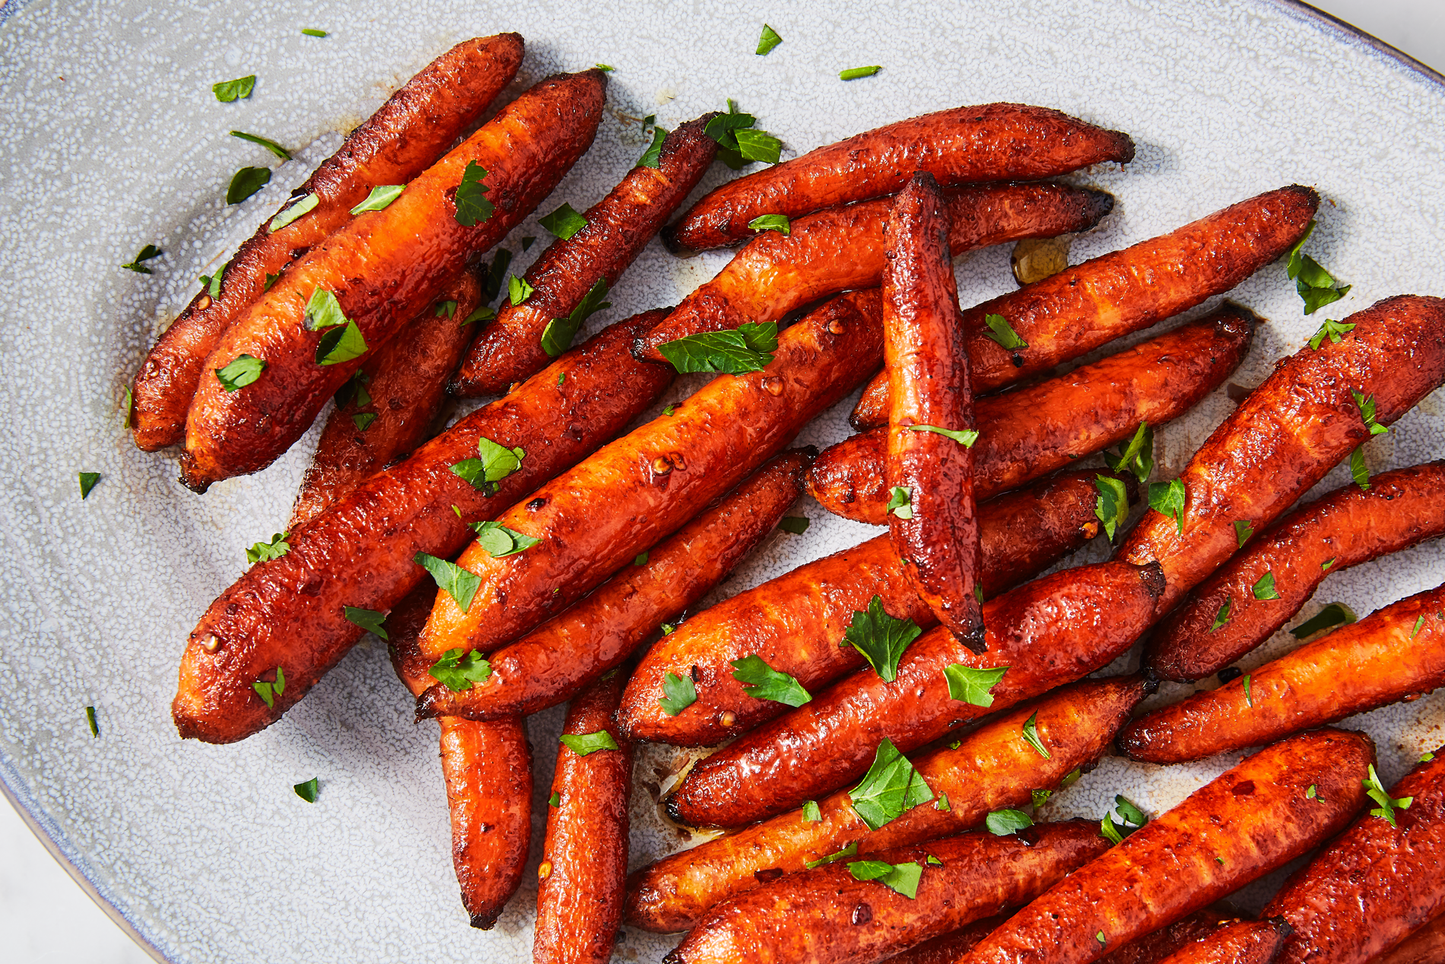 MAPLE BALSAMIC ROASTED BABY CARROTS - 1 PINT